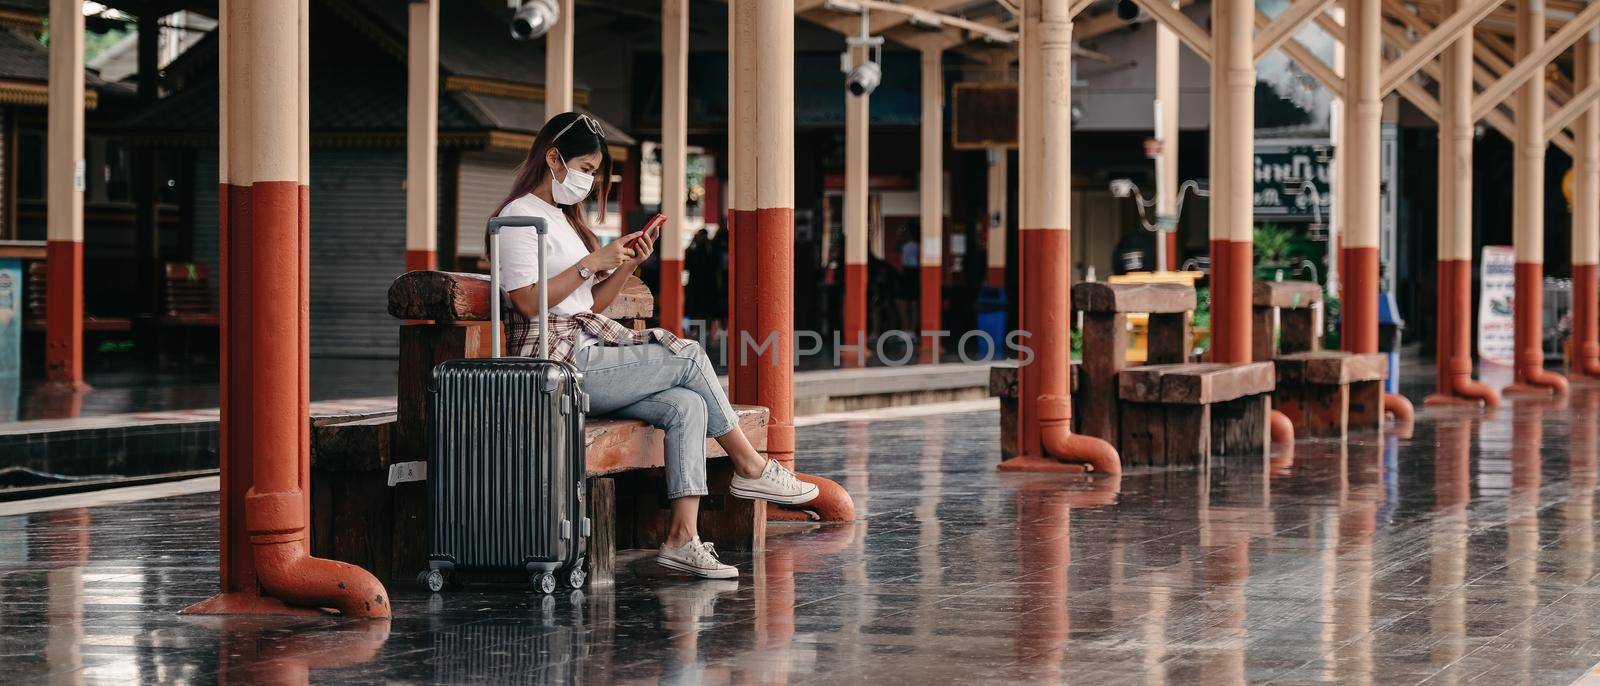 Asian tourist teenage girl at train station using smartphone for online map, social media check-in, or buy ticket booking. Modern travel app technology, lone traveler